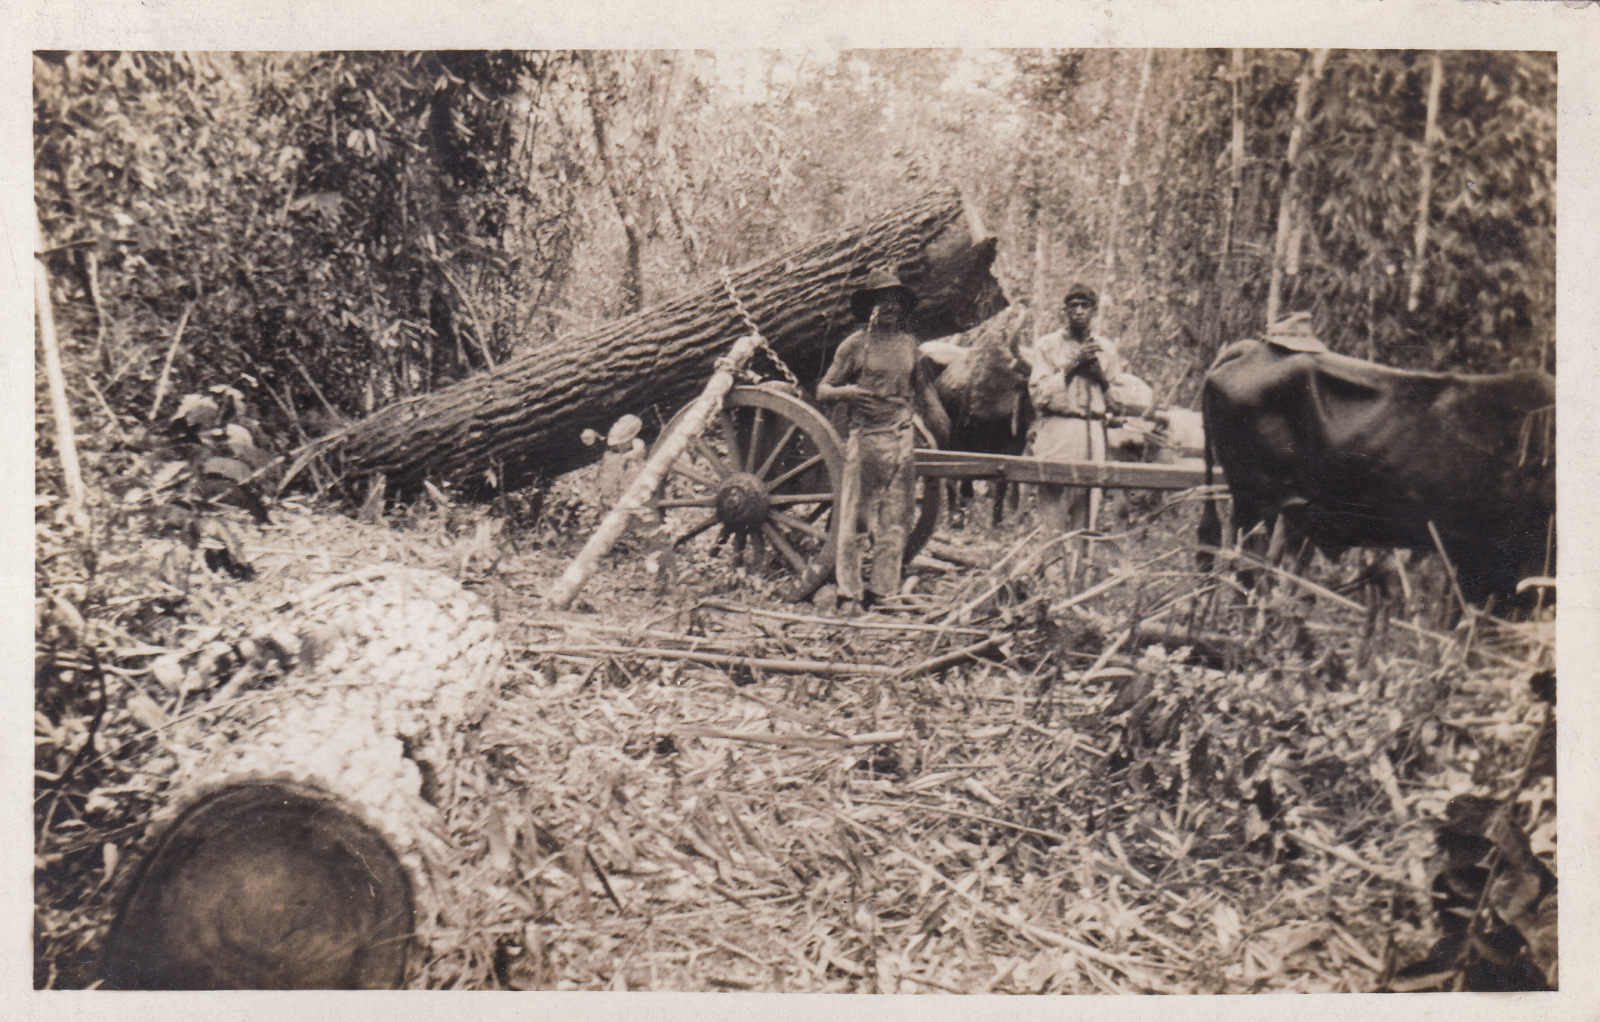 House Clearance - ETHNIC - REAL PHOTO OF TREE FELLING & OXEN CART